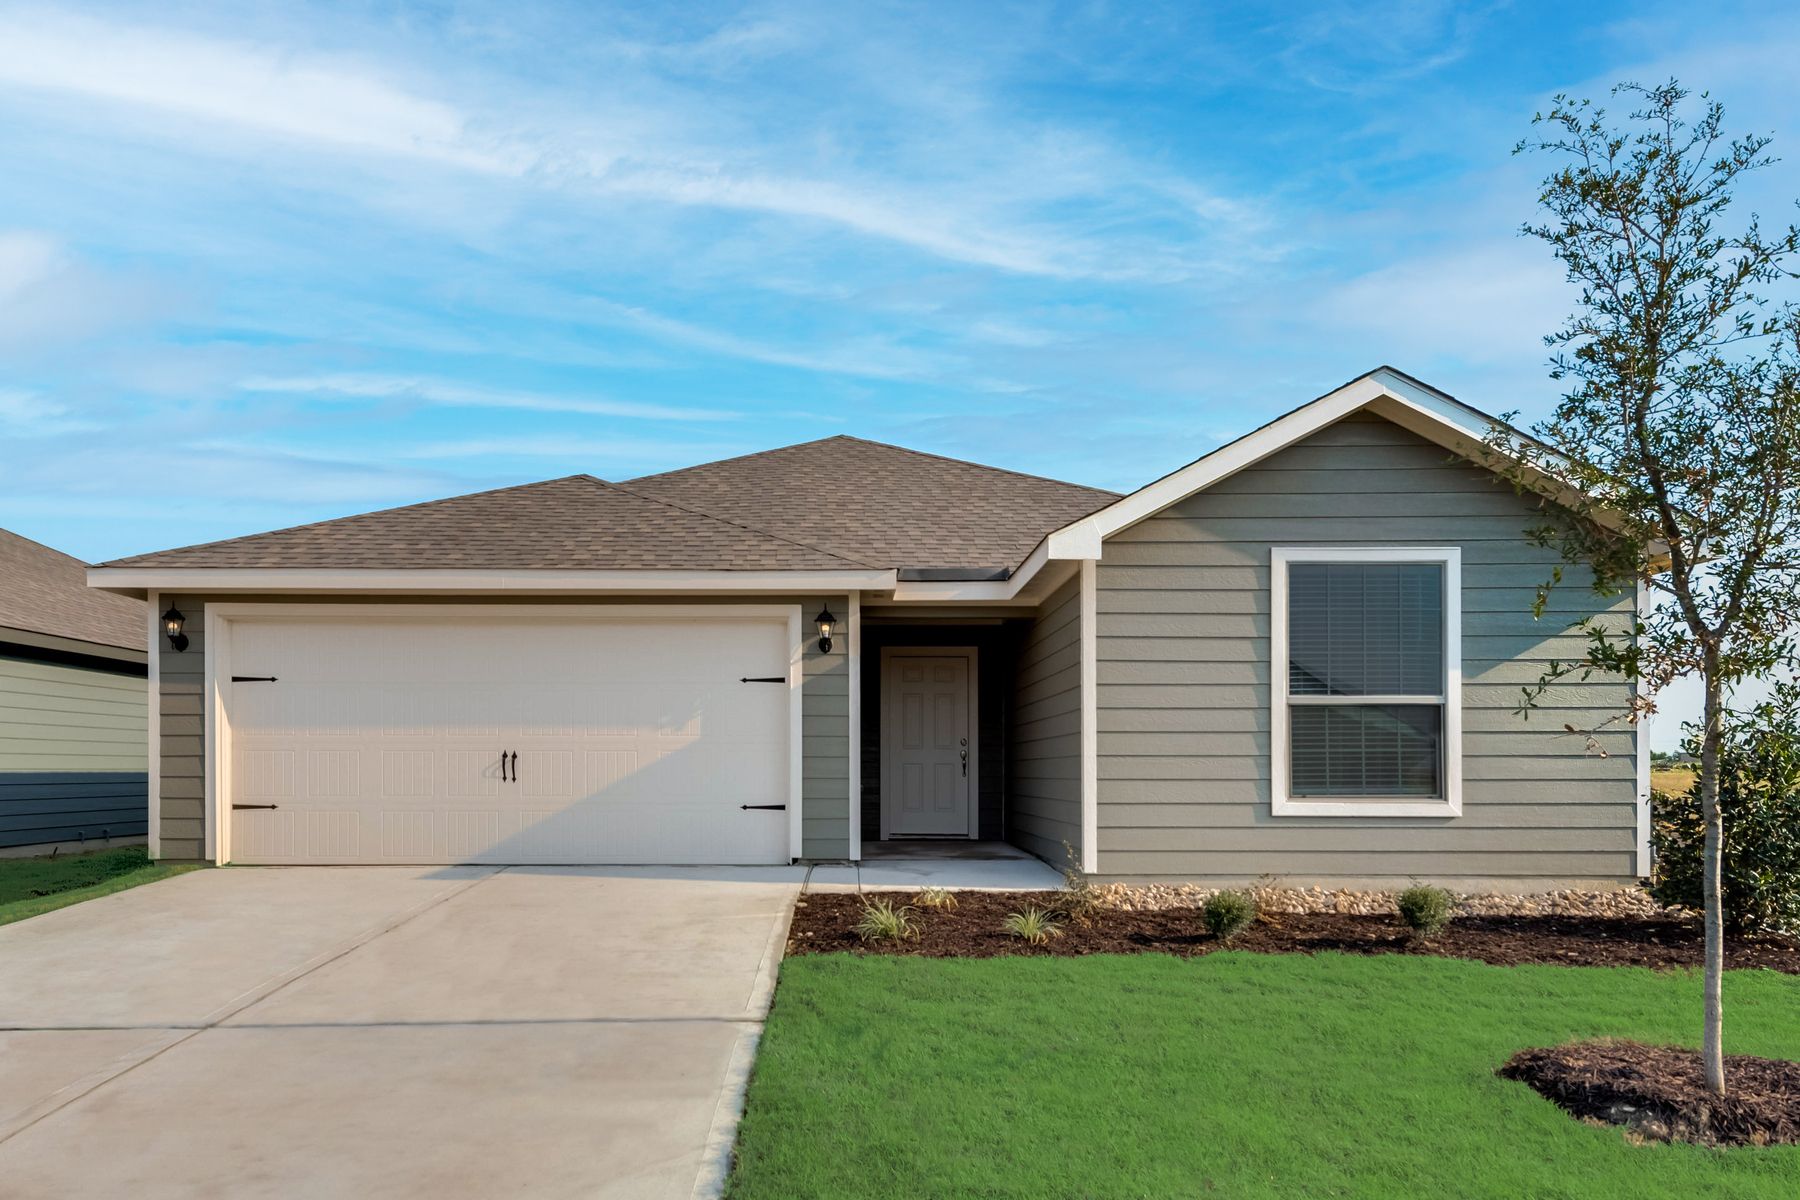 The Sabine by LGI Homes:The Sabine is a remarkable single-story home at Big Sky Estates!